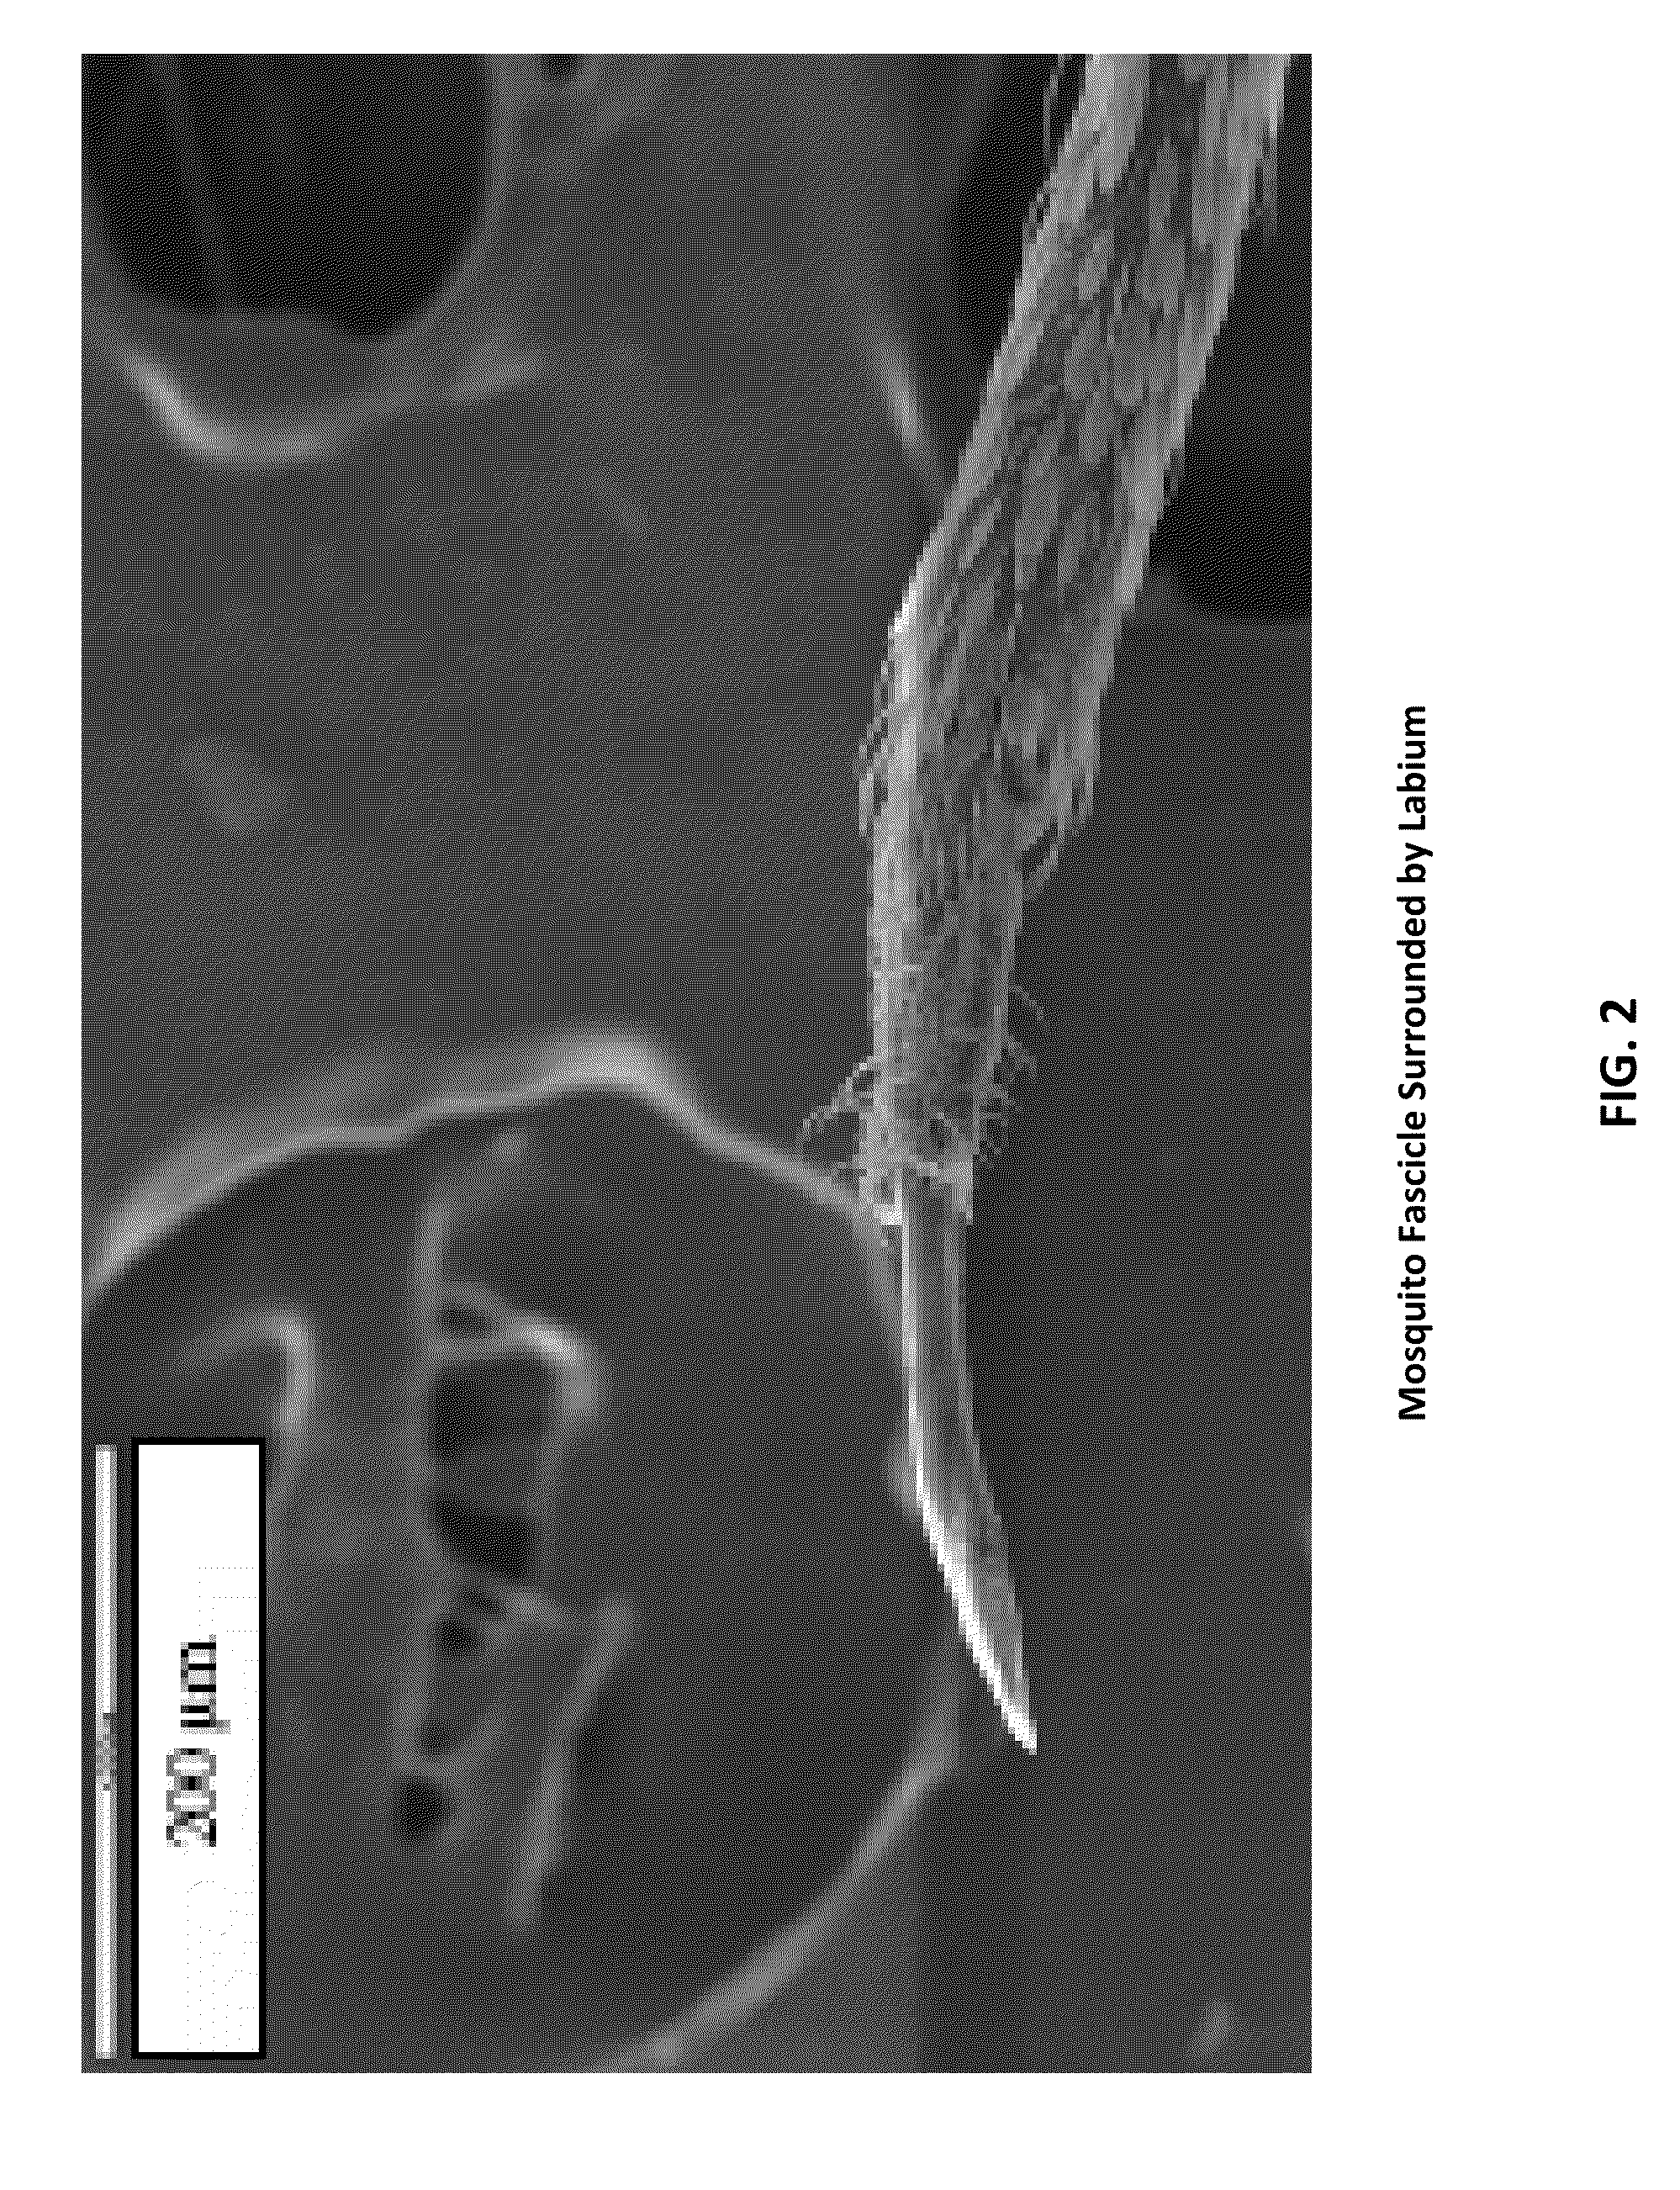 Fiber array for optical imaging and therapeutics